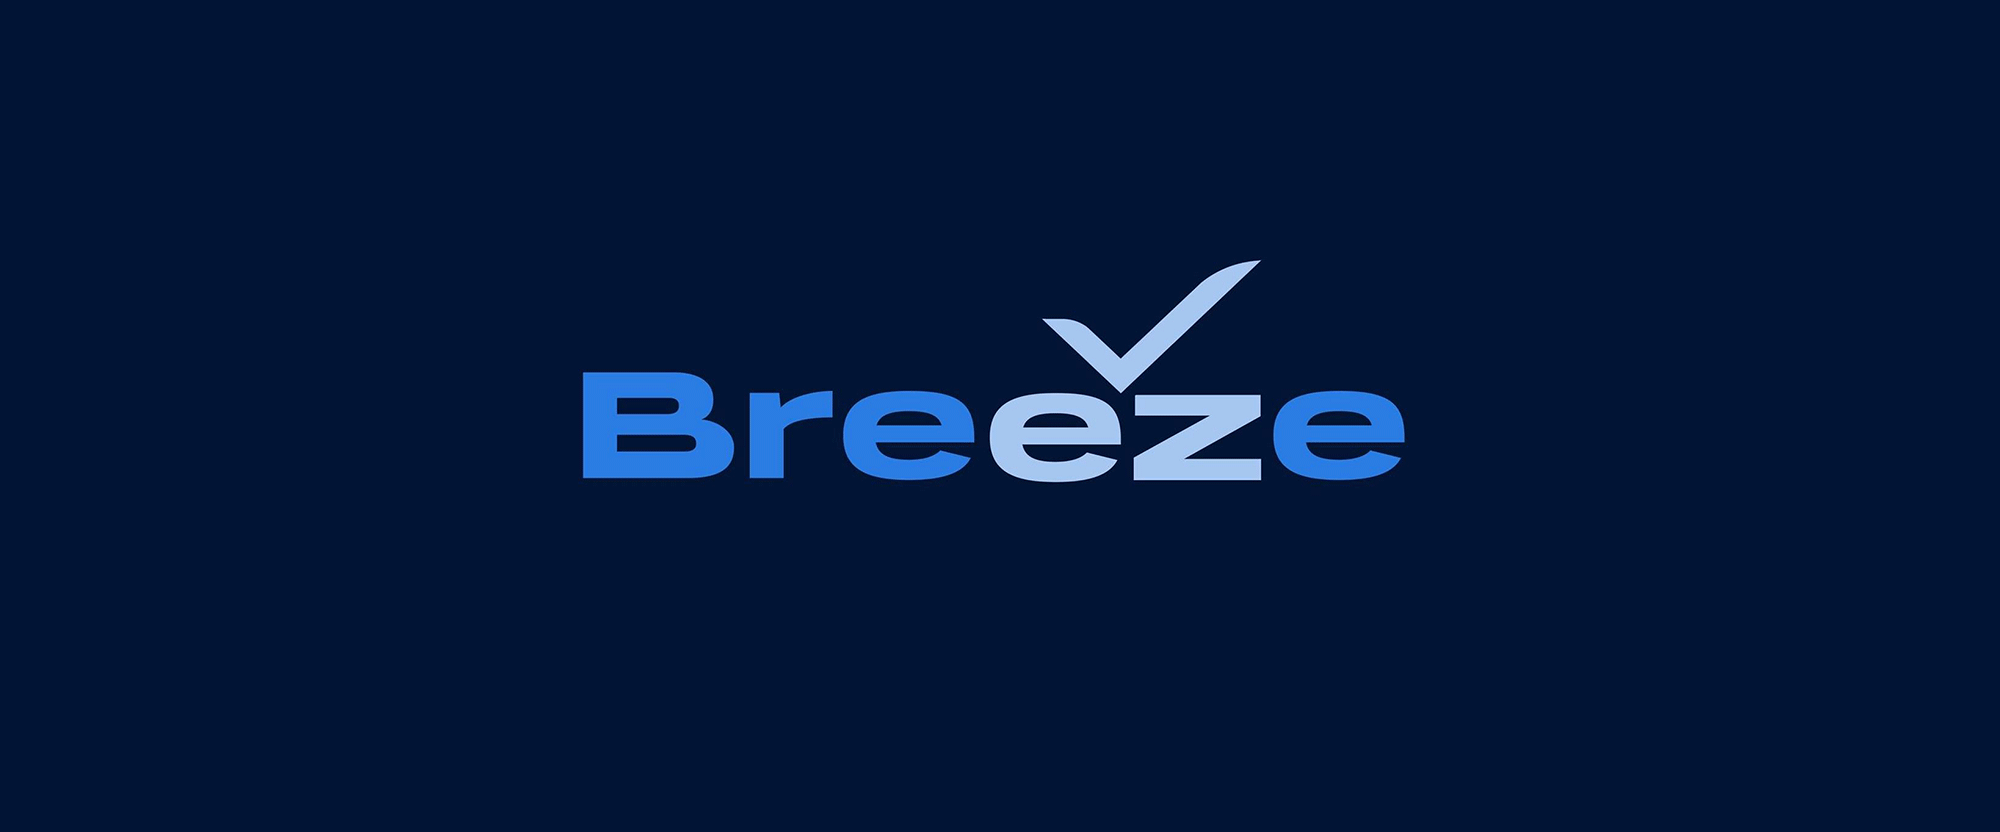 New Name, Logo, and Livery for Breeze